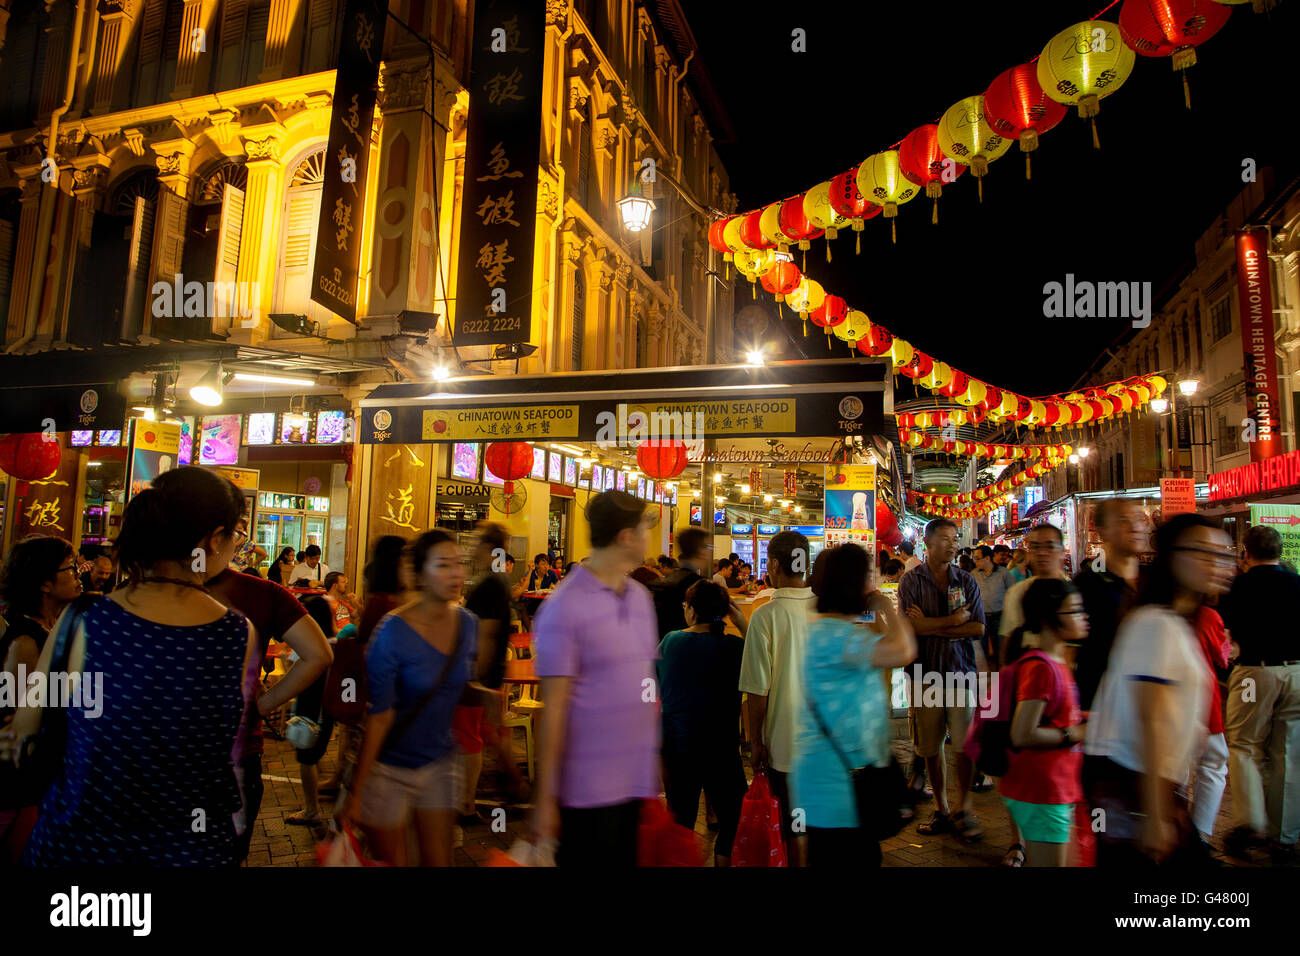 Singapore, Singapore - January 17, 2016: Chinatown attracts a crowd during Chinese New Year festivities. Stock Photo